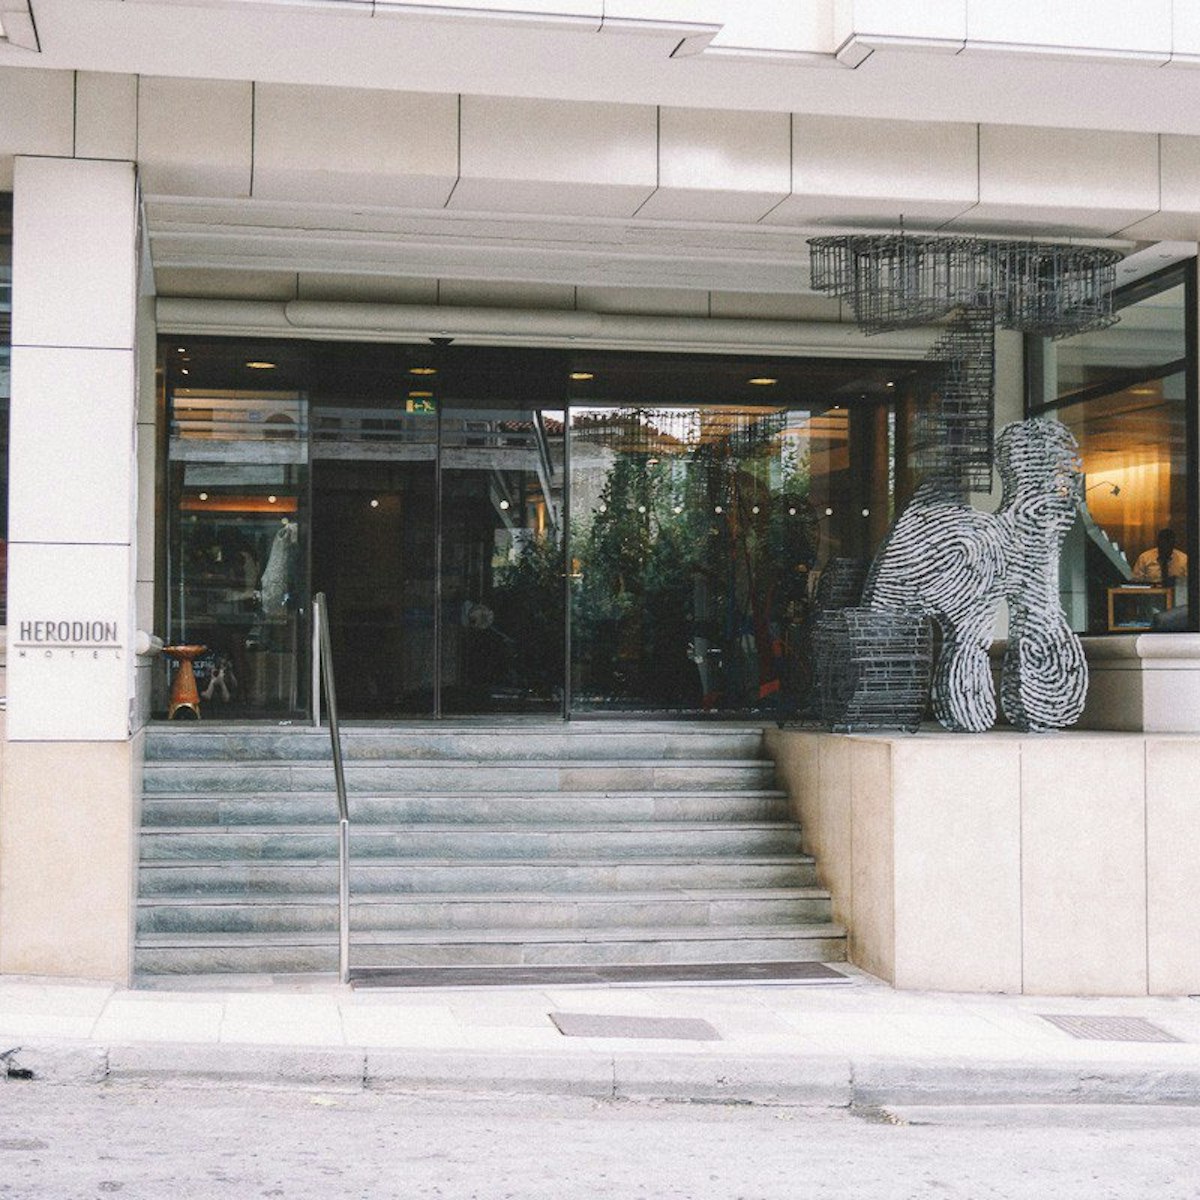 Entrance to the Herodion hotel in Athens